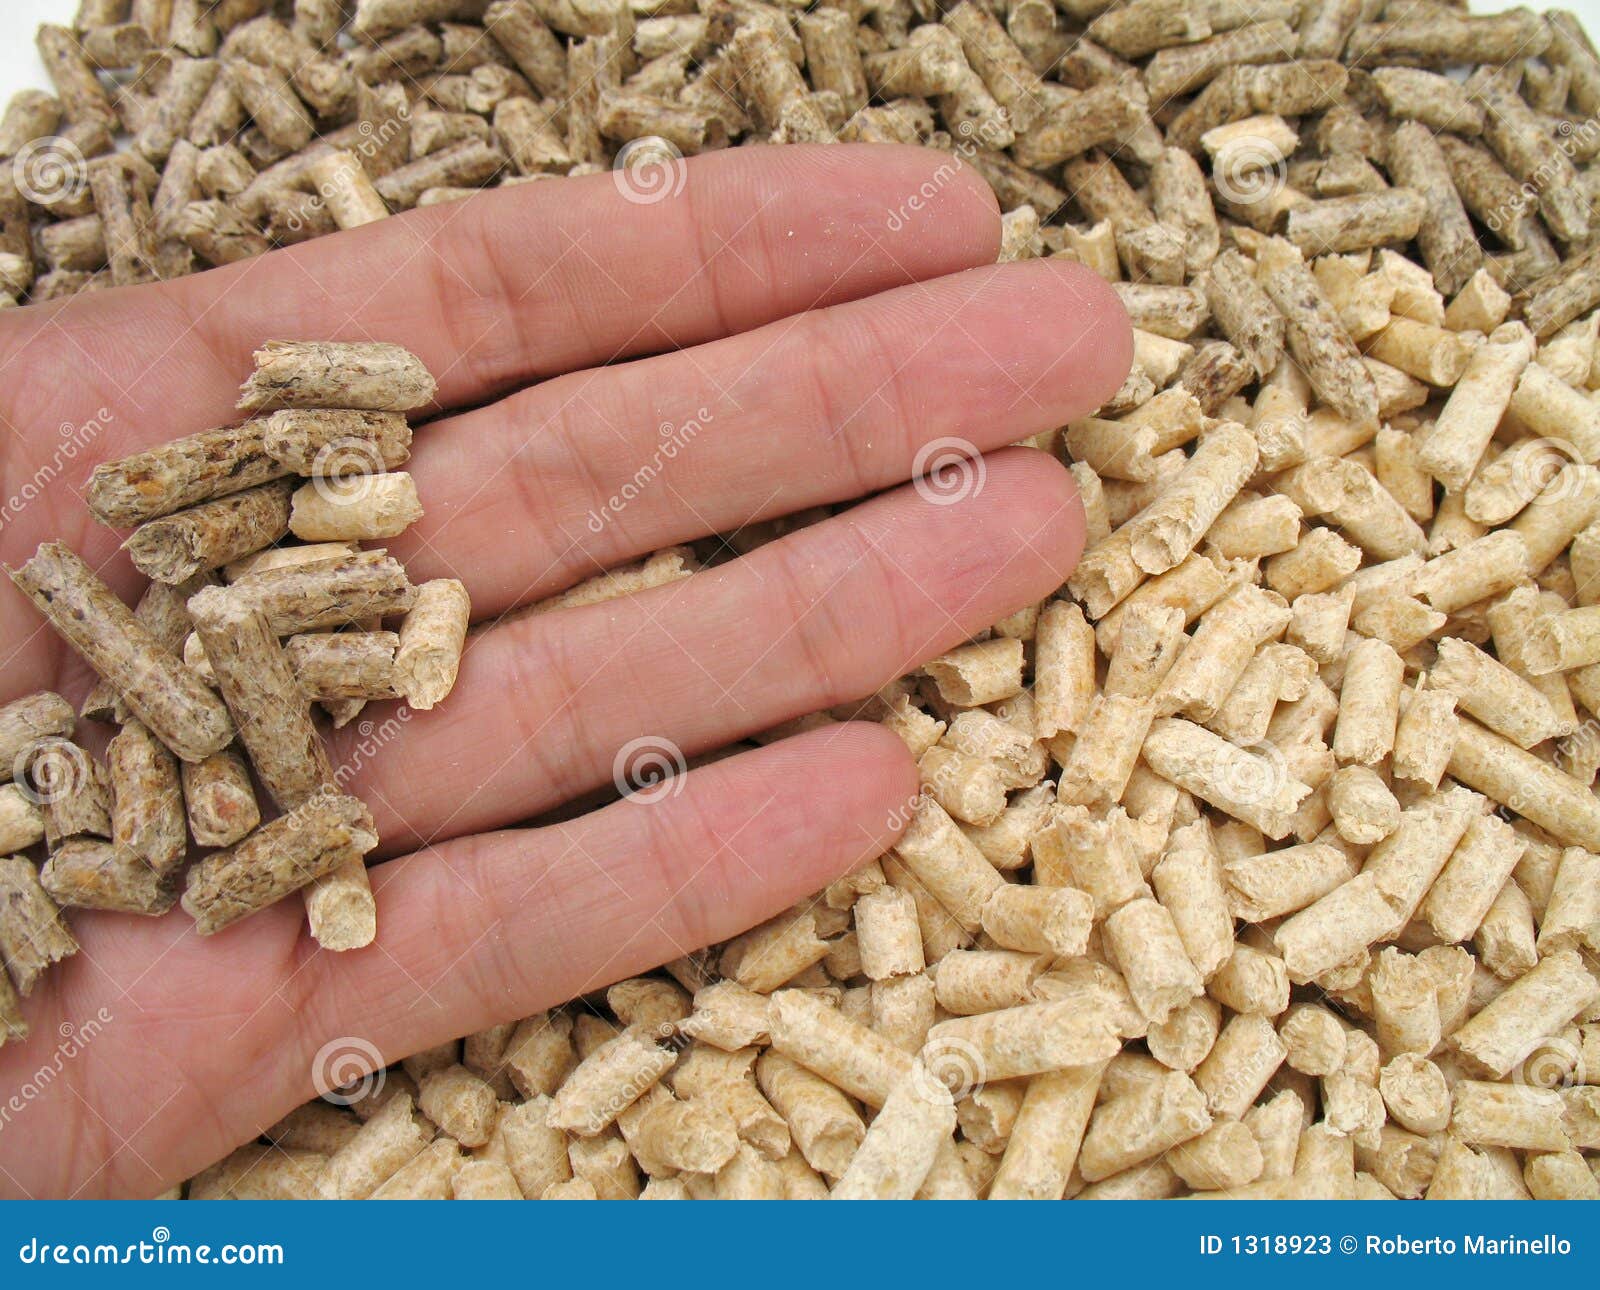 Hand is giving wood pellets for fireplaces and stoves.